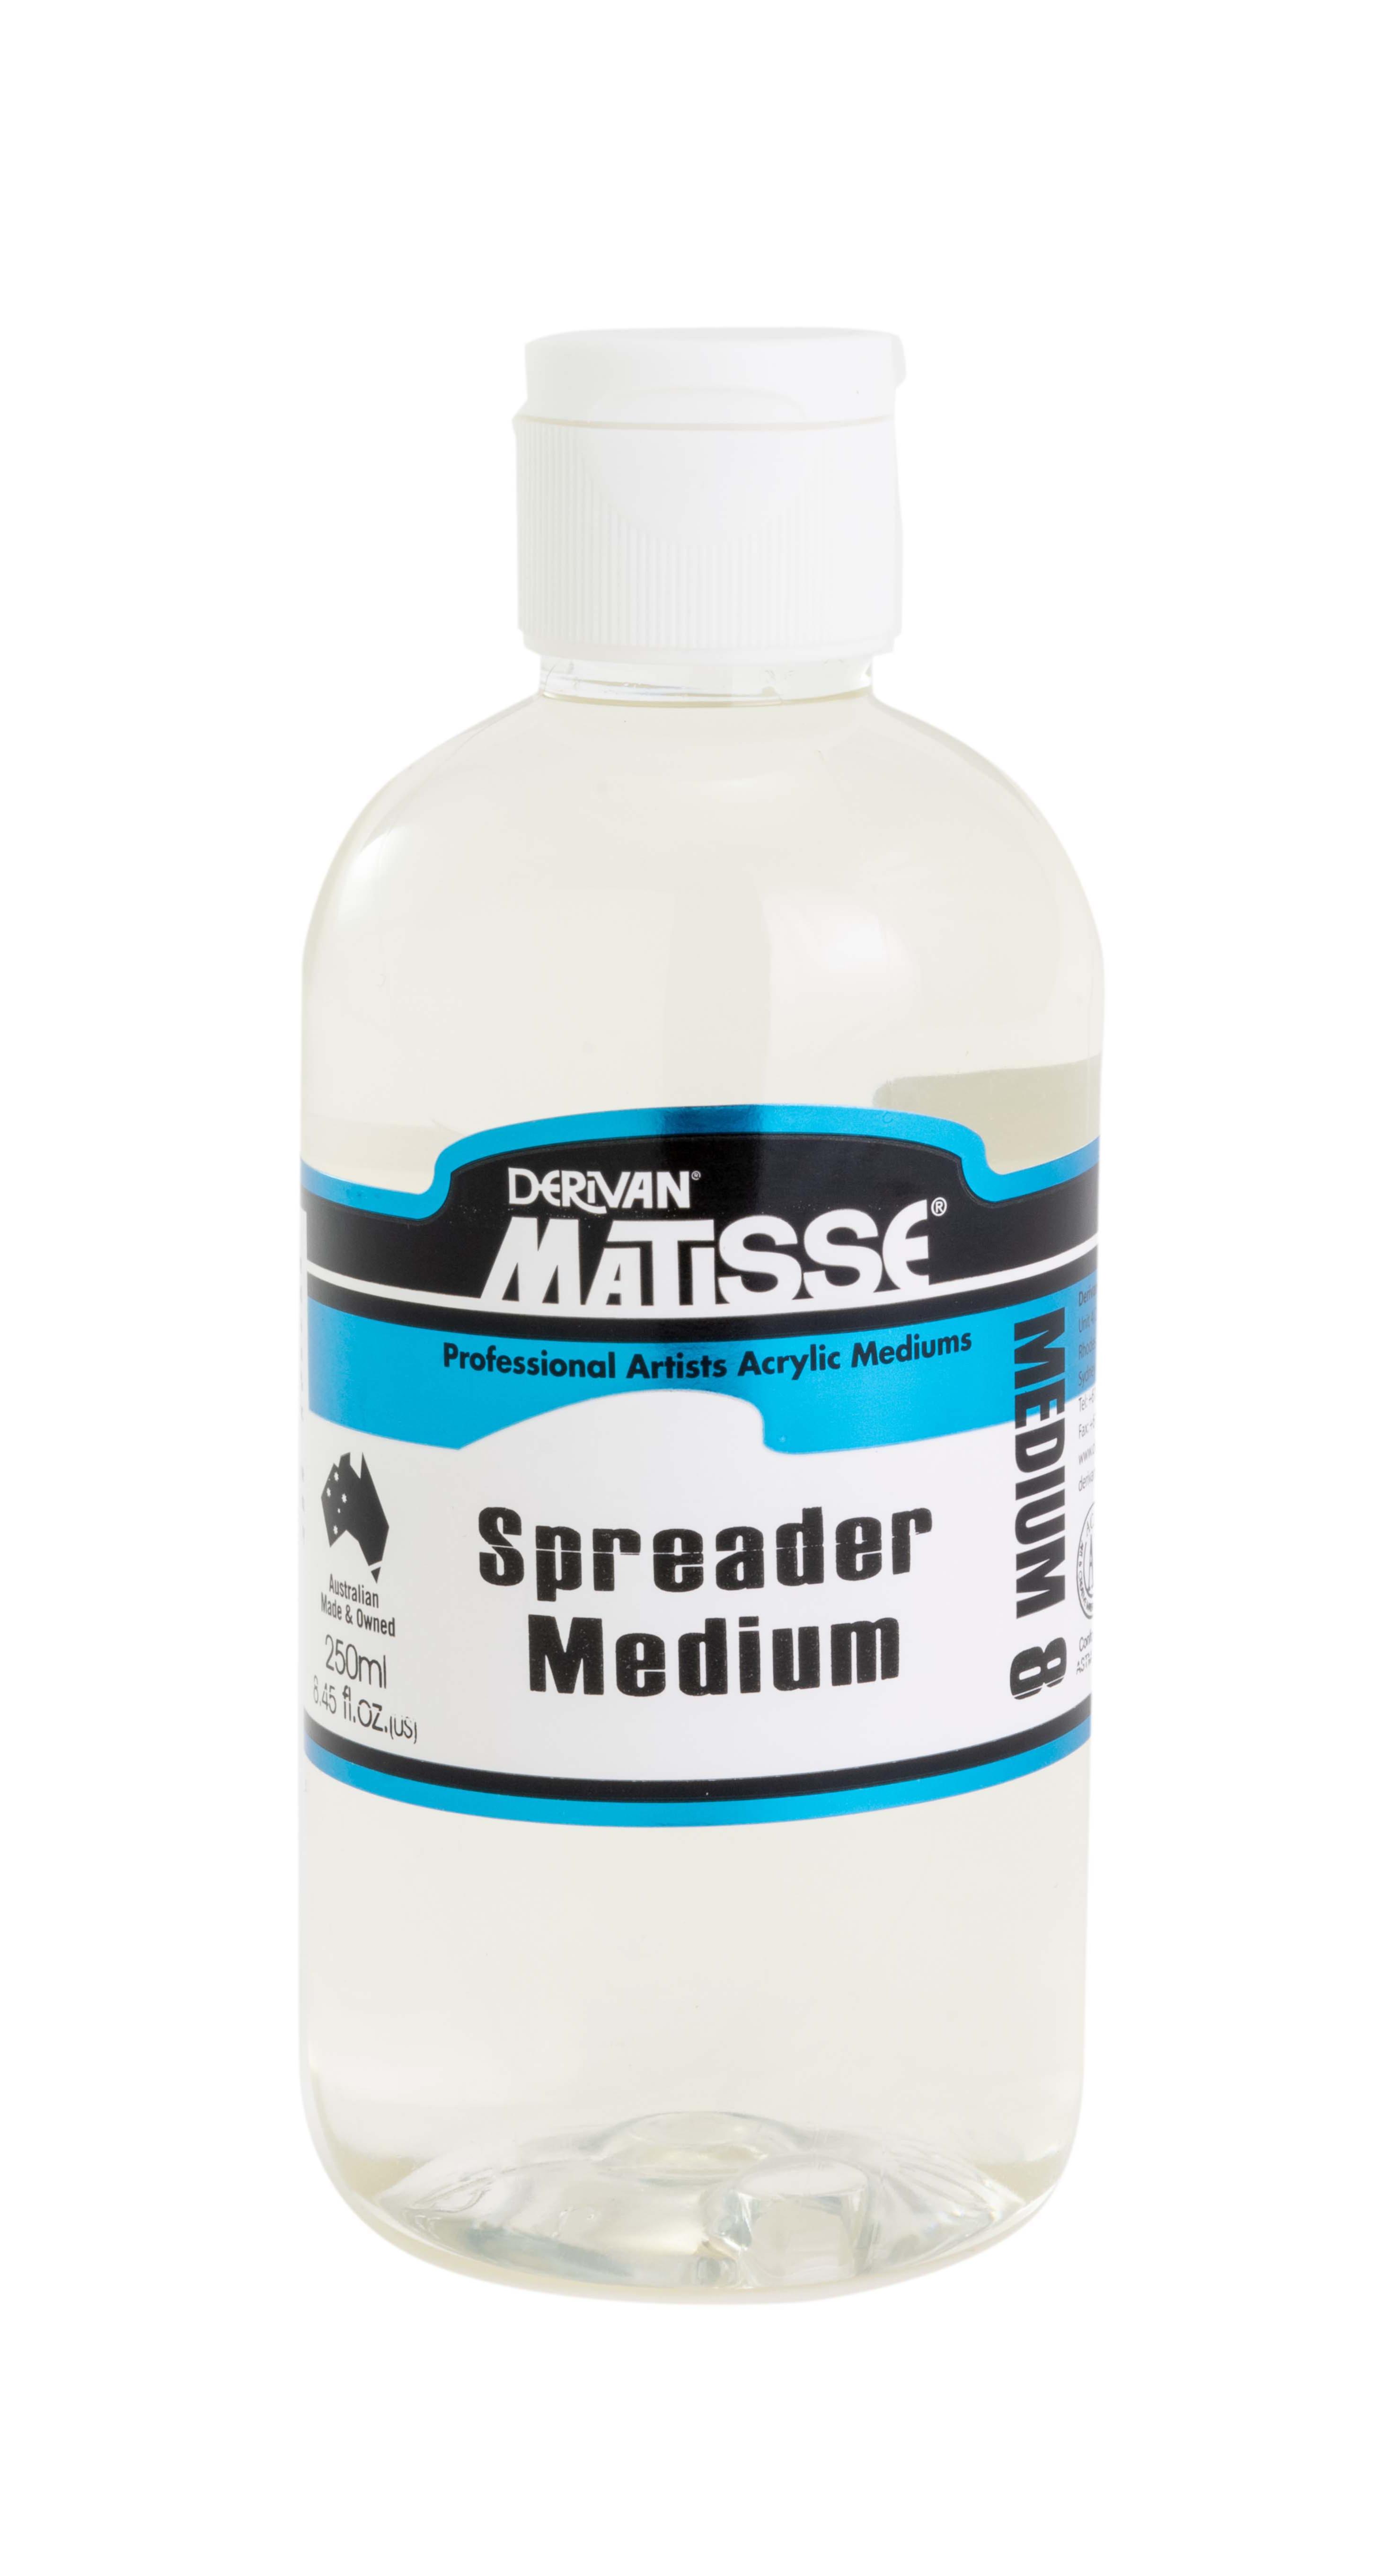 MM1  How to Extend Your Acrylic Paint Drying Time - Matisse Retarder  Medium 